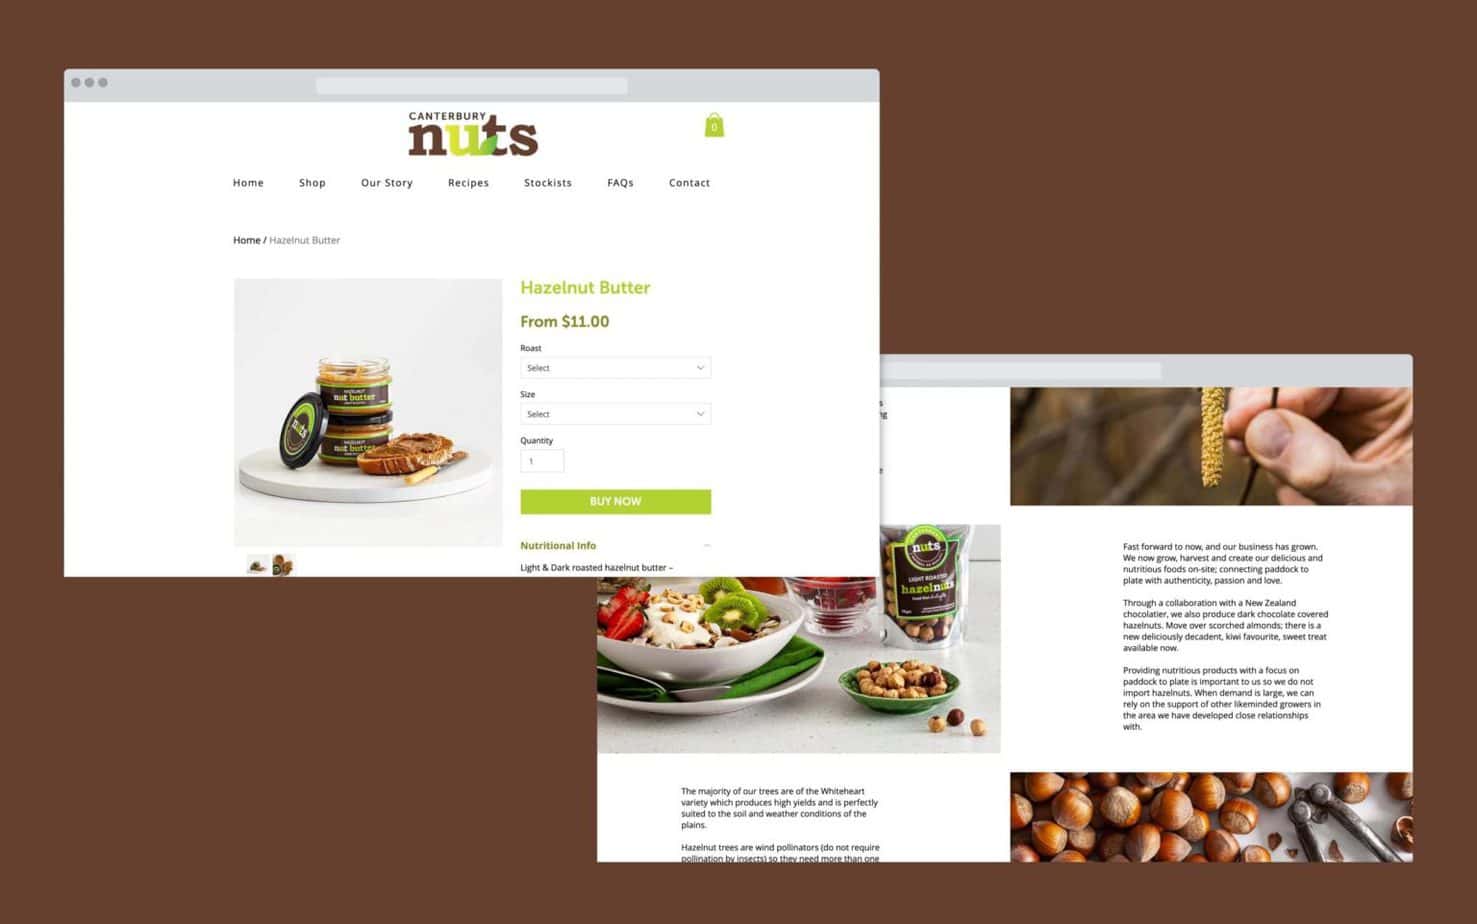 Canterbury Nuts Wix Online Store by Catchlight, Christchurch